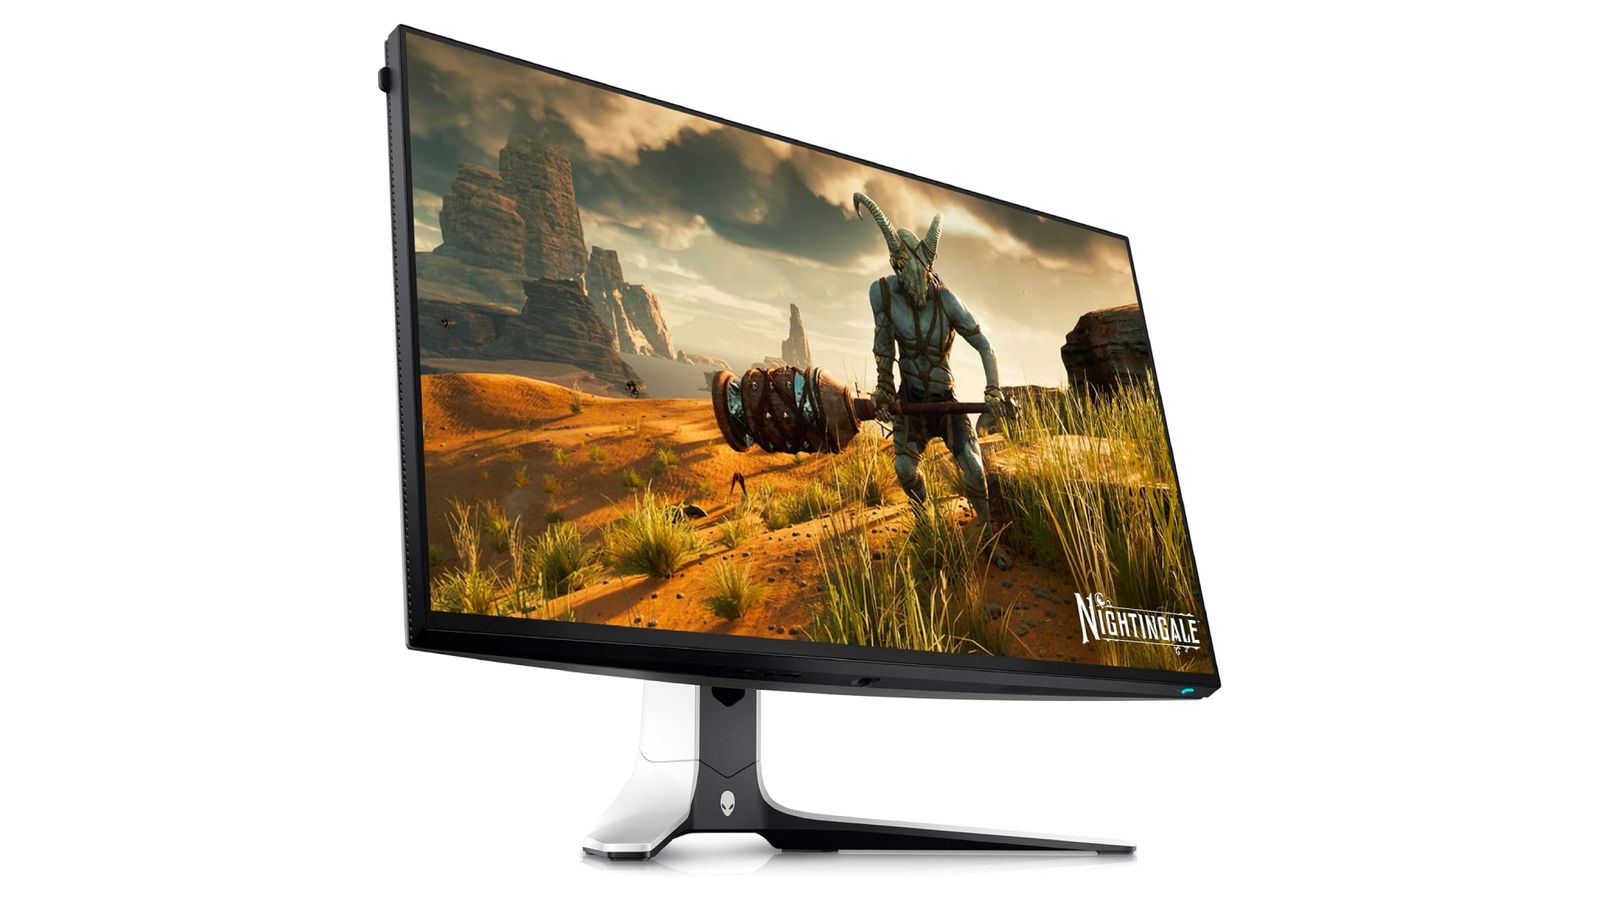 Alienware AW2723DF product image of a black and white monitor with Nightingale gameplay on the display.